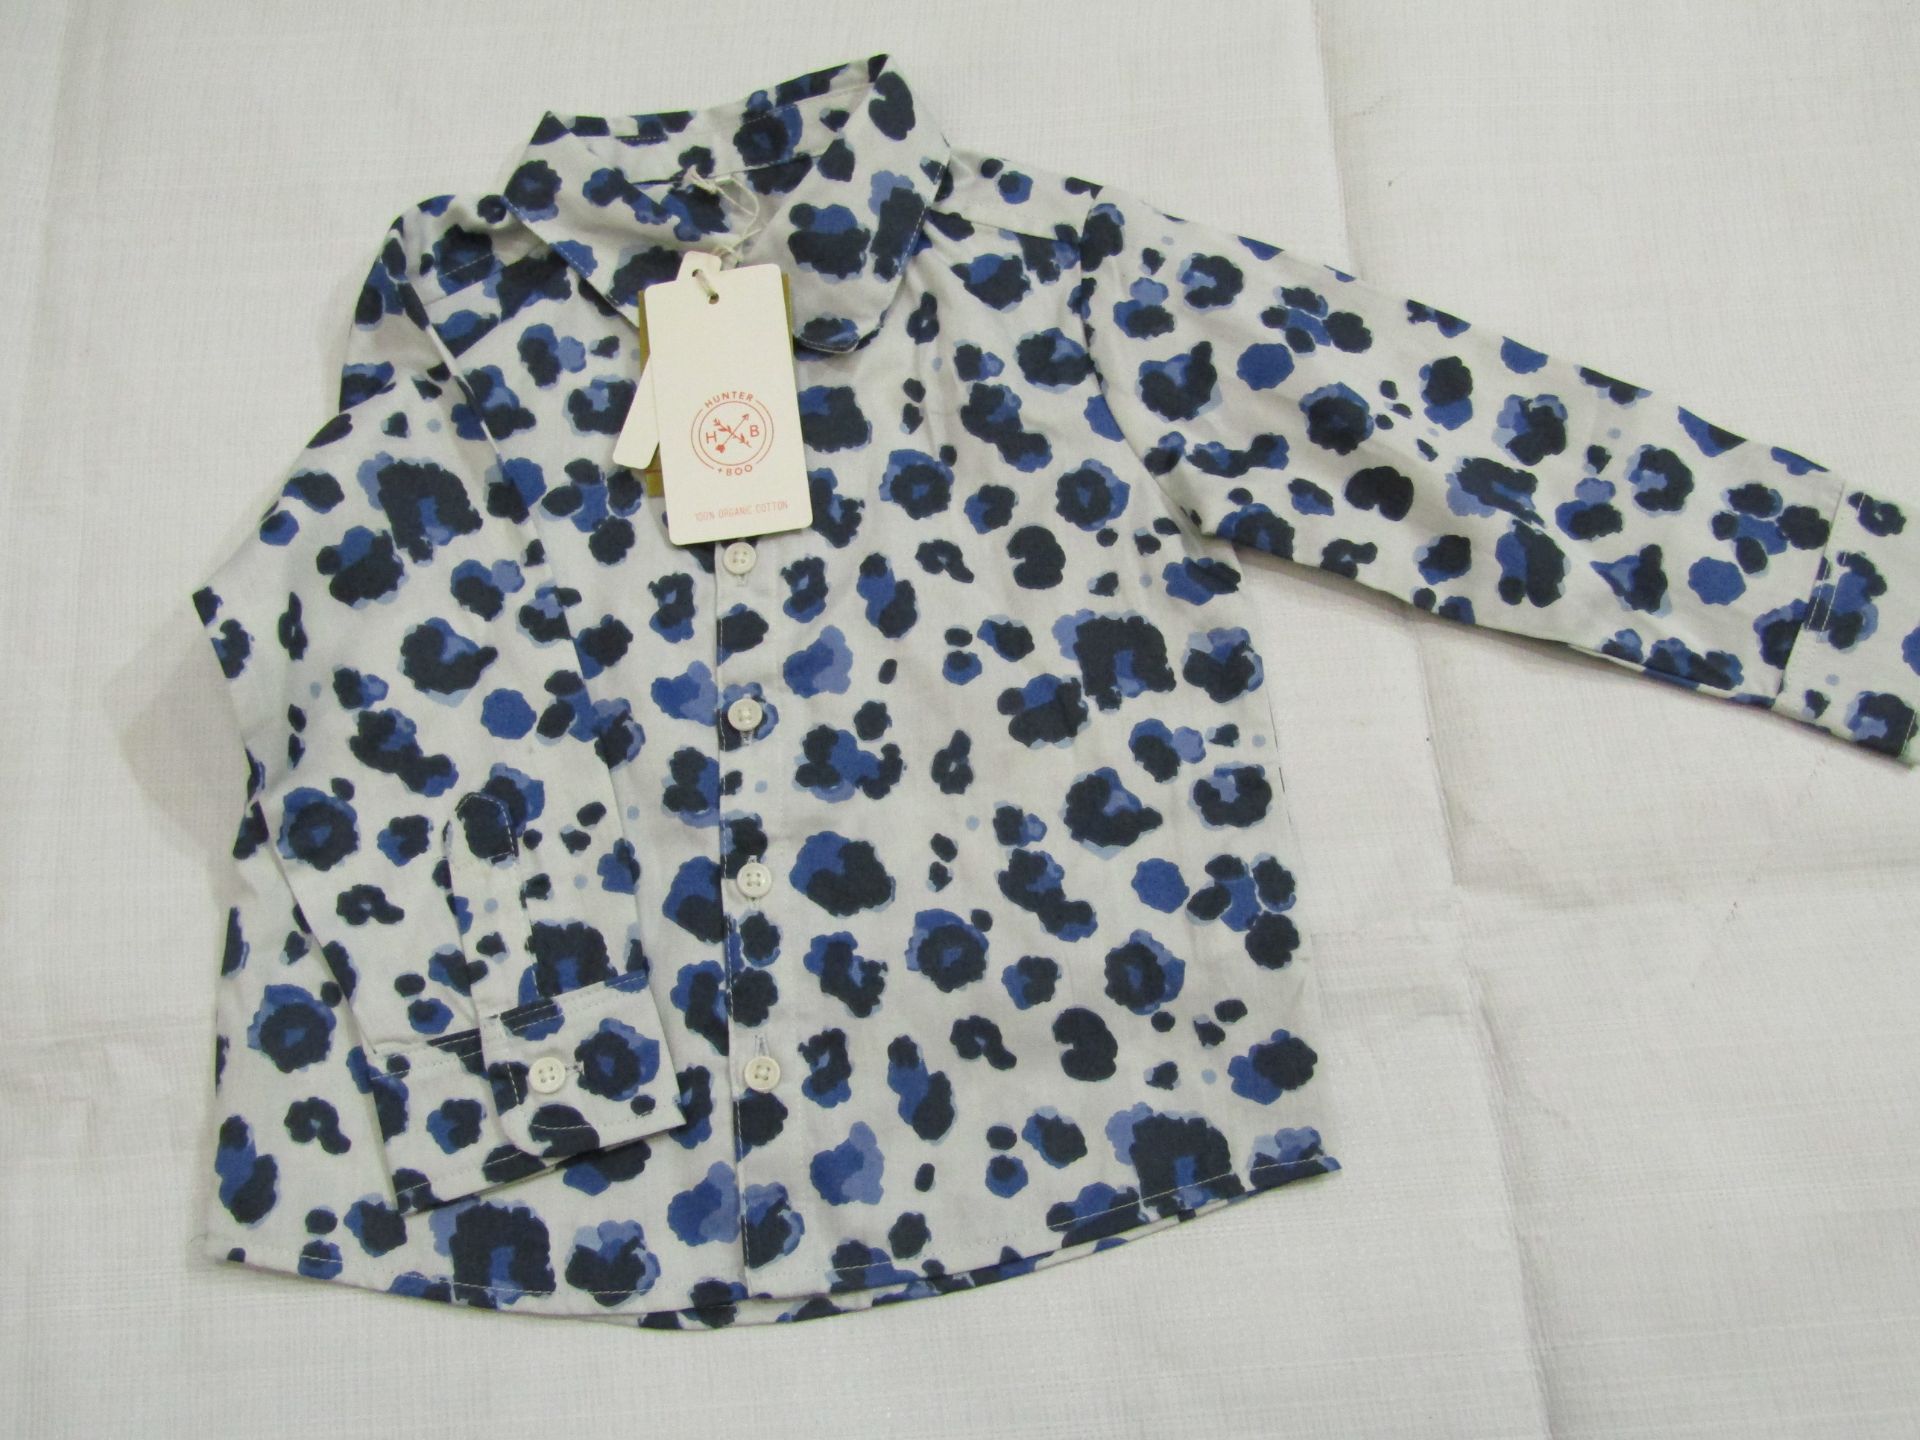 Hunter & Boo Yala Blue Shirt Aged 12-24 Months New & Packaged RRP £21